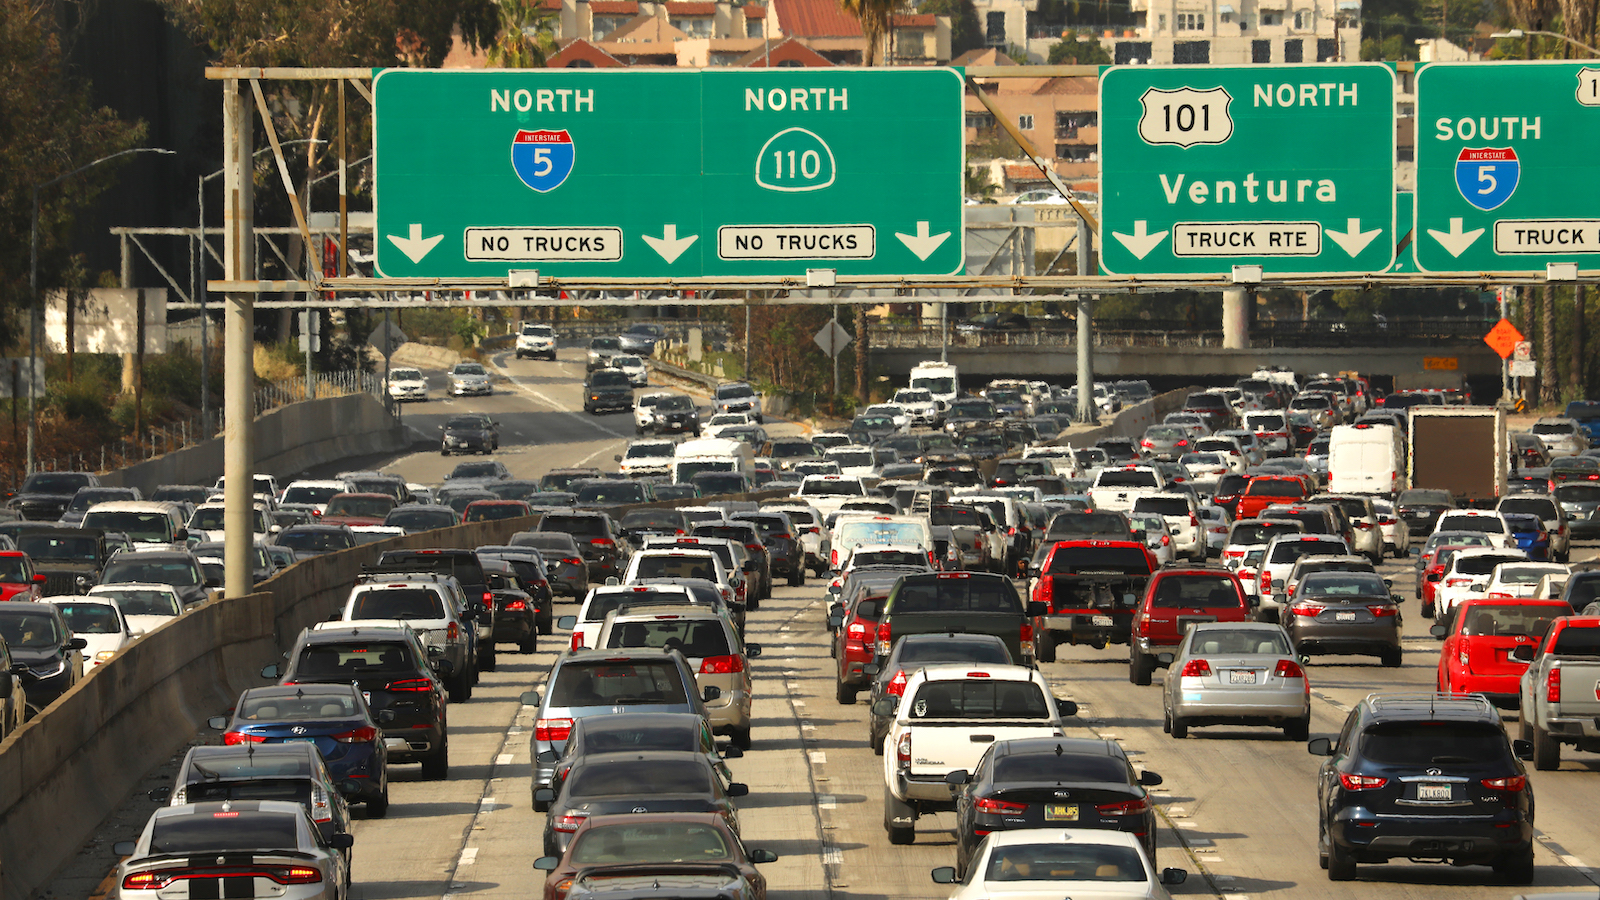 Rush hour at the intersection of the 110 and 101 freeways on June 15, 2021 in Los Angeles.